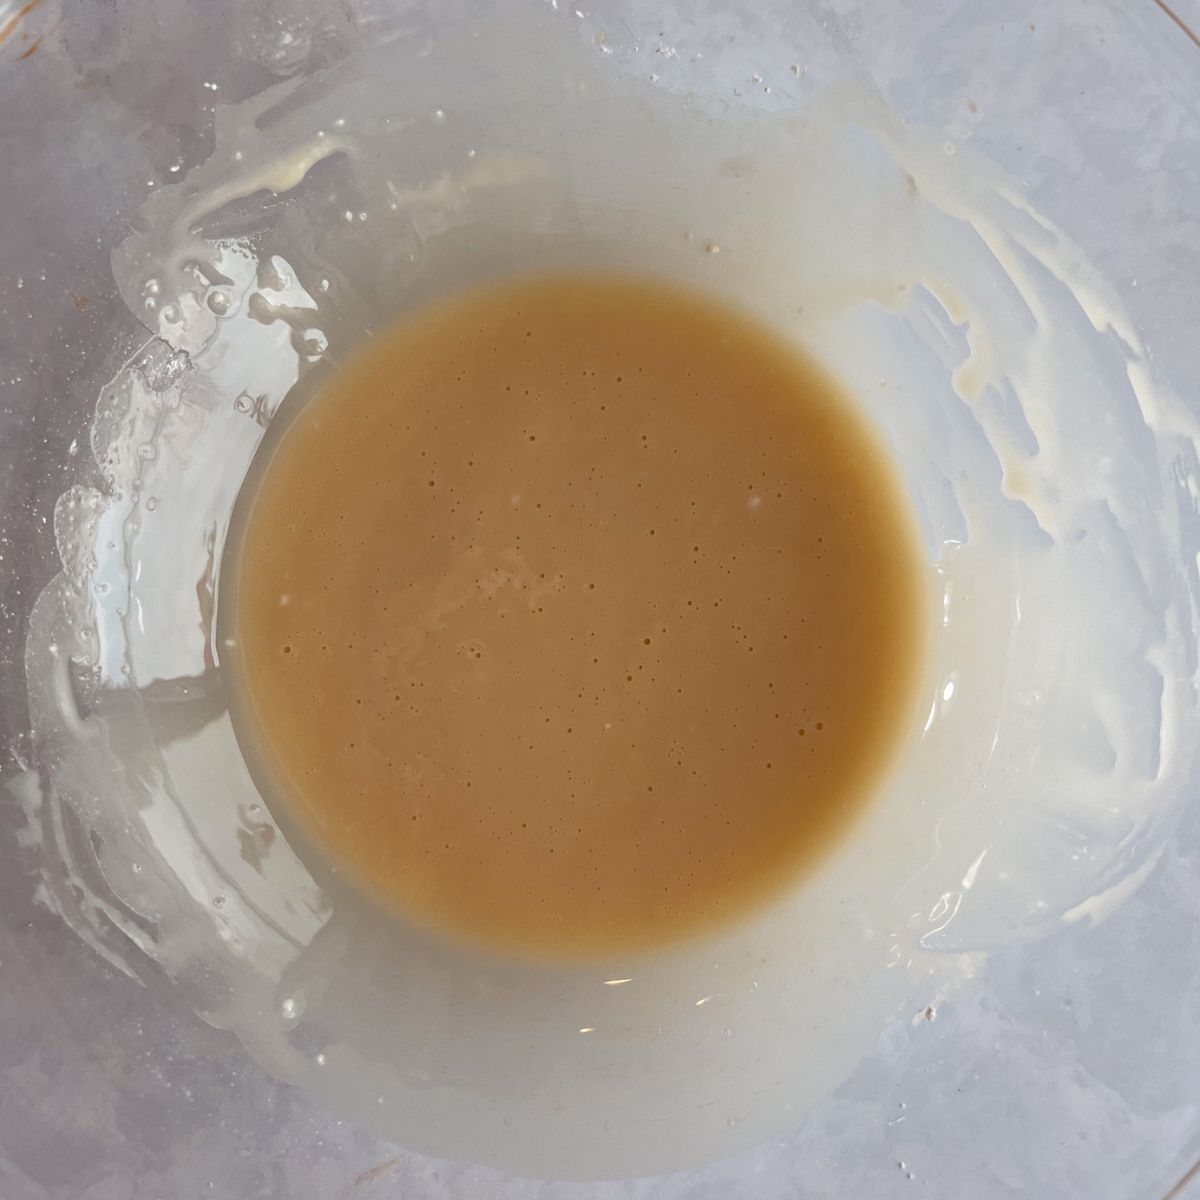 Orange glaze whisked together in a mixing bowl.